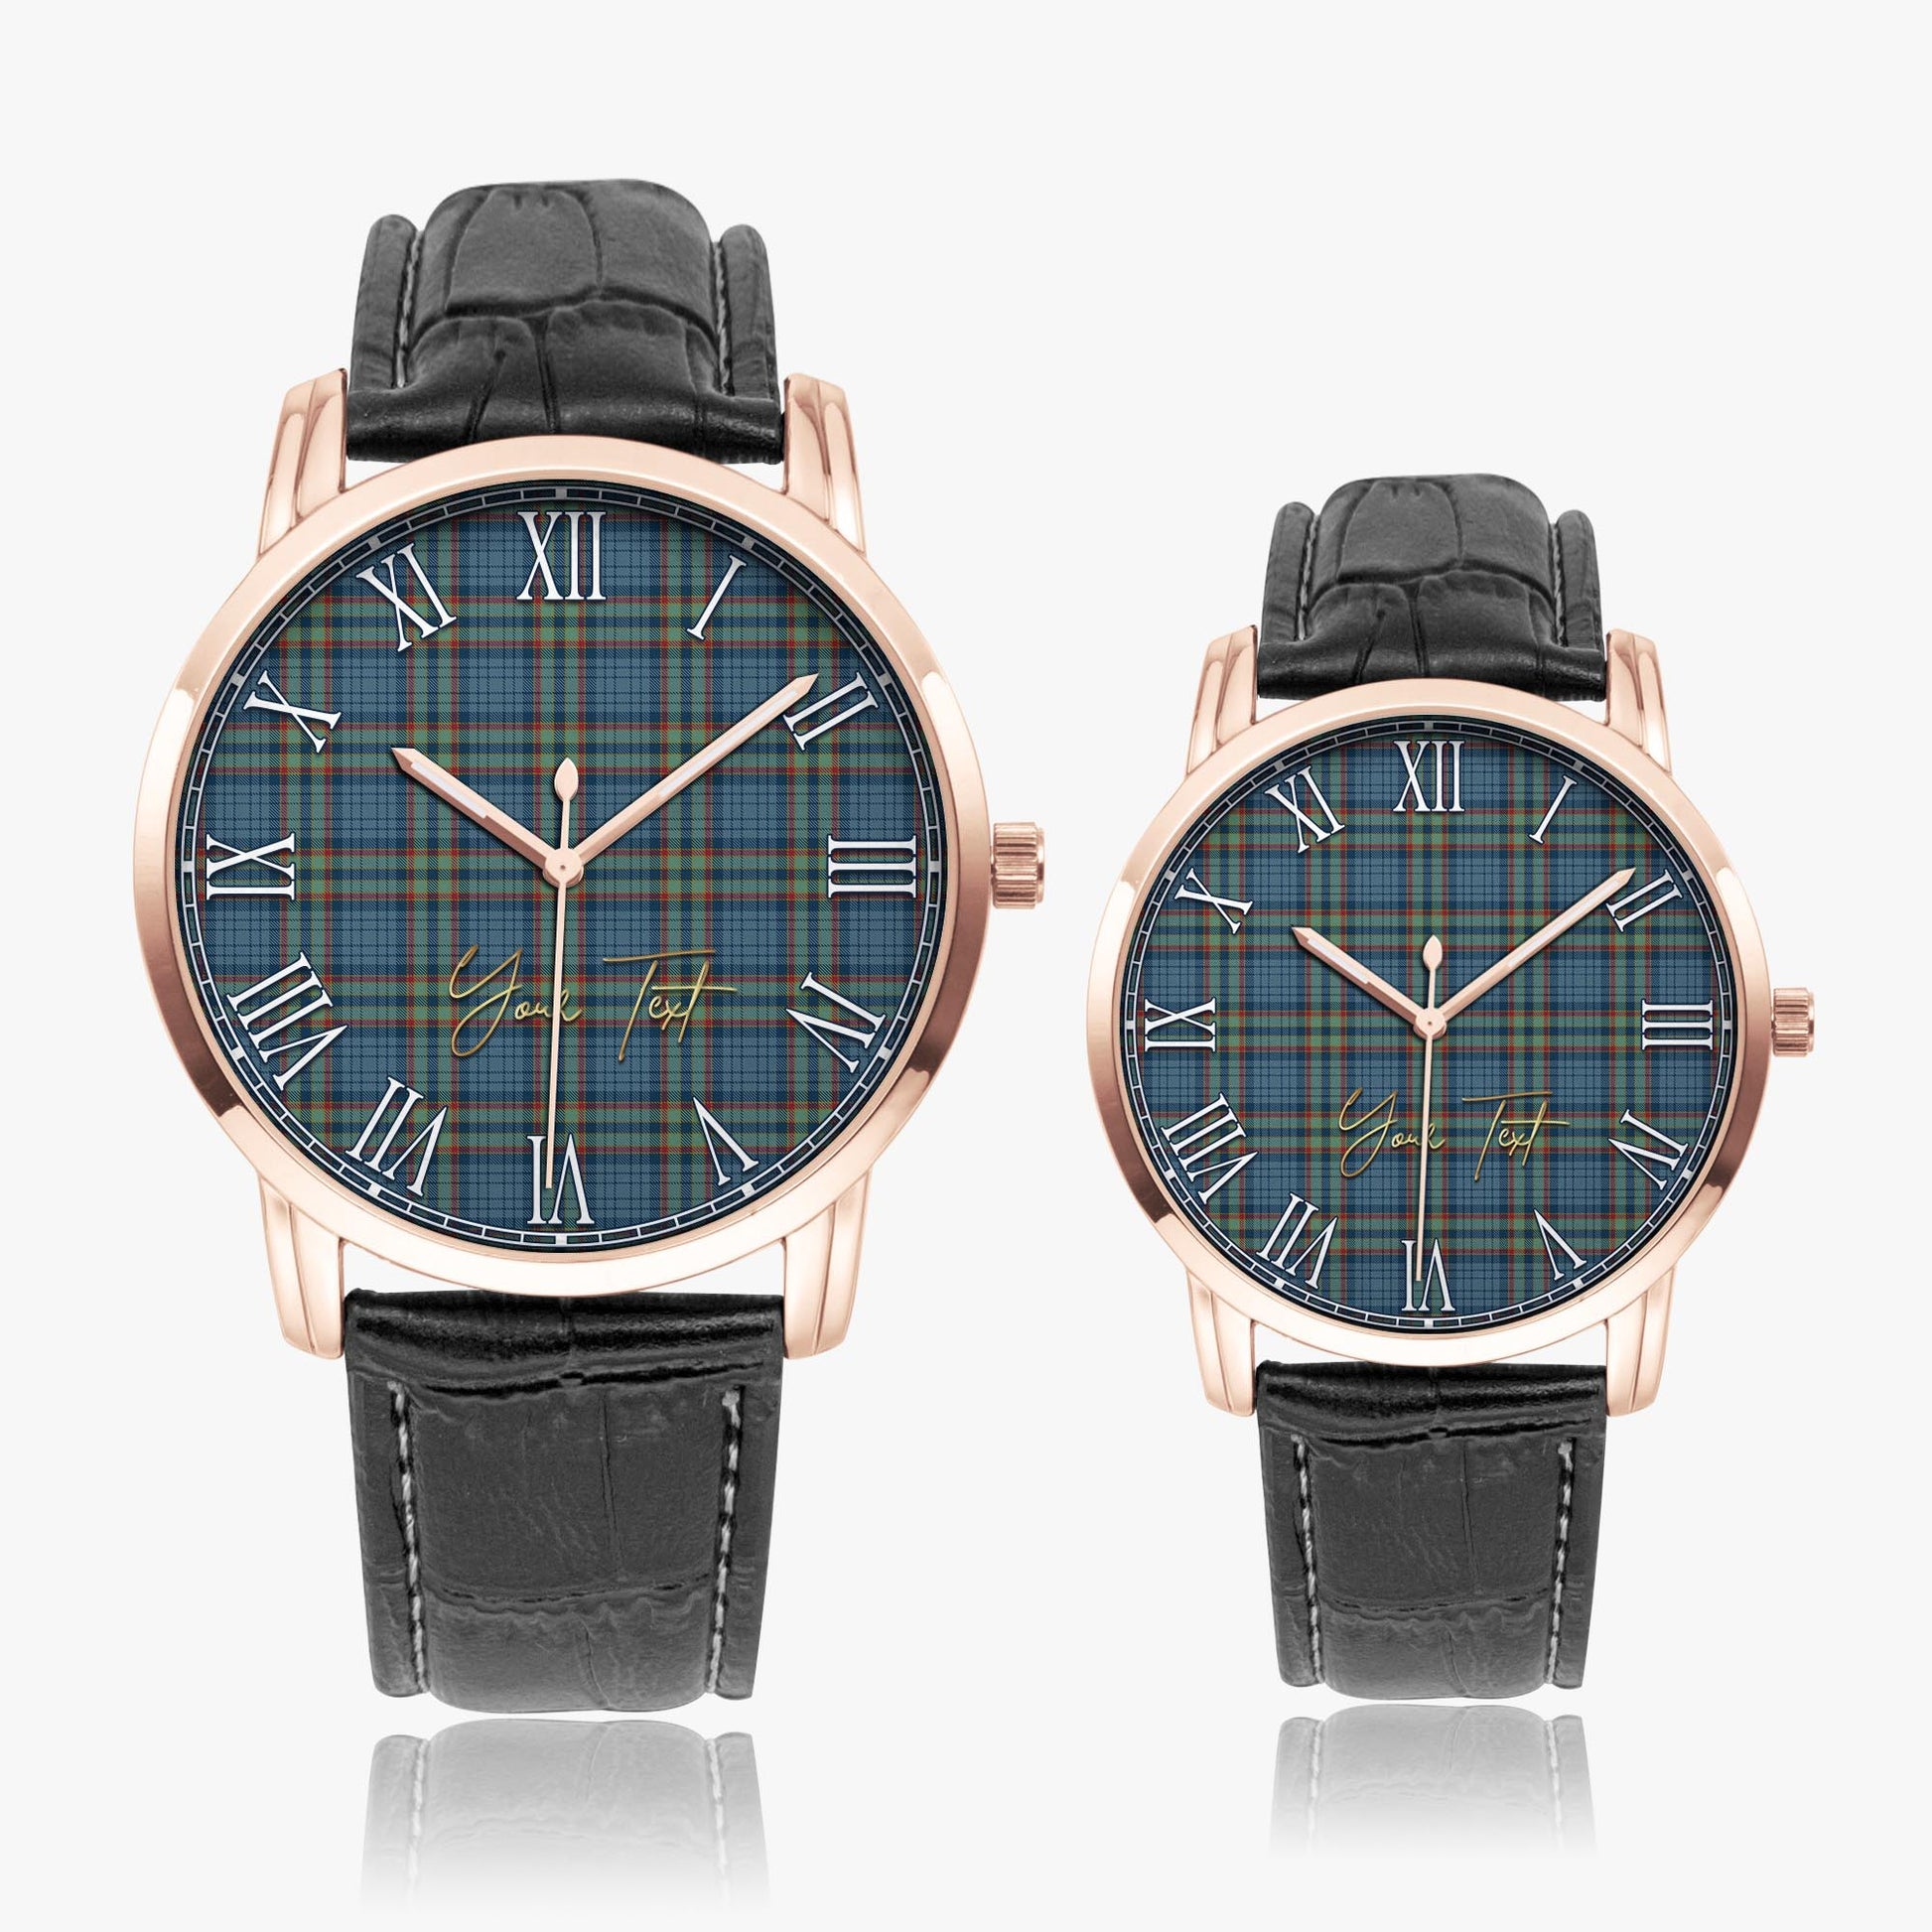 Ralston UK Tartan Personalized Your Text Leather Trap Quartz Watch Wide Type Rose Gold Case With Black Leather Strap - Tartanvibesclothing